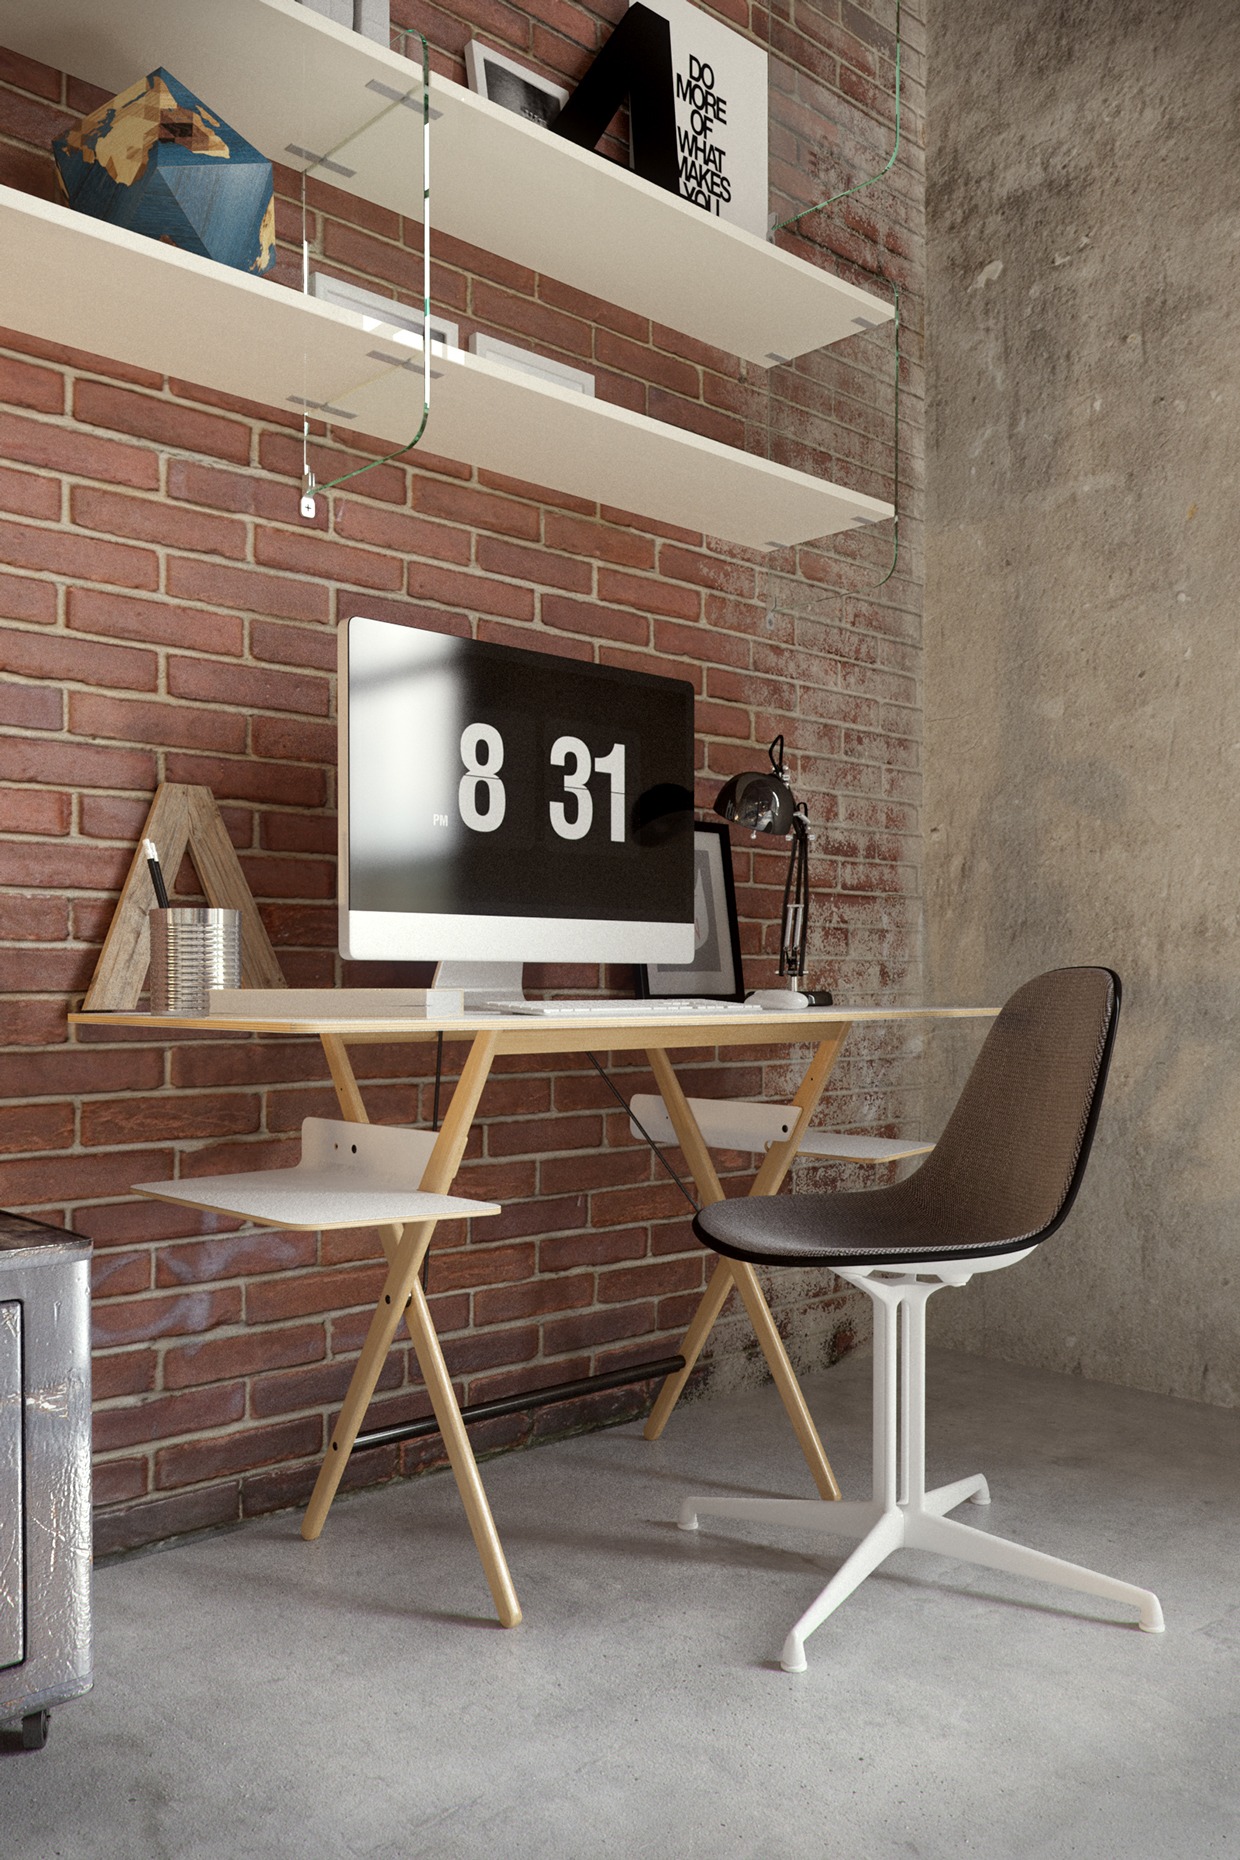 modern minimalist desk design "width =" 1240 "height =" 1860 "srcset =" https://mileray.com/wp-content/uploads/2020/05/1588505422_472_Unique-and-Artistic-Bedroom-Design-With-Simple-Furniture-For-Young.jpg 1240w, https: // myfashionos. com / wp-content / uploads / 2016/03 / minimalist-desktop-200x300.jpg 200w, https://mileray.com/wp-content/uploads/2016/03/minimalist-desk-768x1152.jpg 768w, https: //mileray.com/wp-content/uploads/2016/03/minimalist-desk-683x1024.jpg 683w, https://mileray.com/wp-content/uploads/2016/03/minimalist-desk-696x1044.jpg 696w, https://mileray.com/wp-content/uploads/2016/03/minimalist-desk-1068x1602.jpg 1068w, https://mileray.com/wp-content/uploads/2016/03/minimalist-desk -280x420.jpg 280w "sizes =" (maximum width: 1240px) 100vw, 1240px